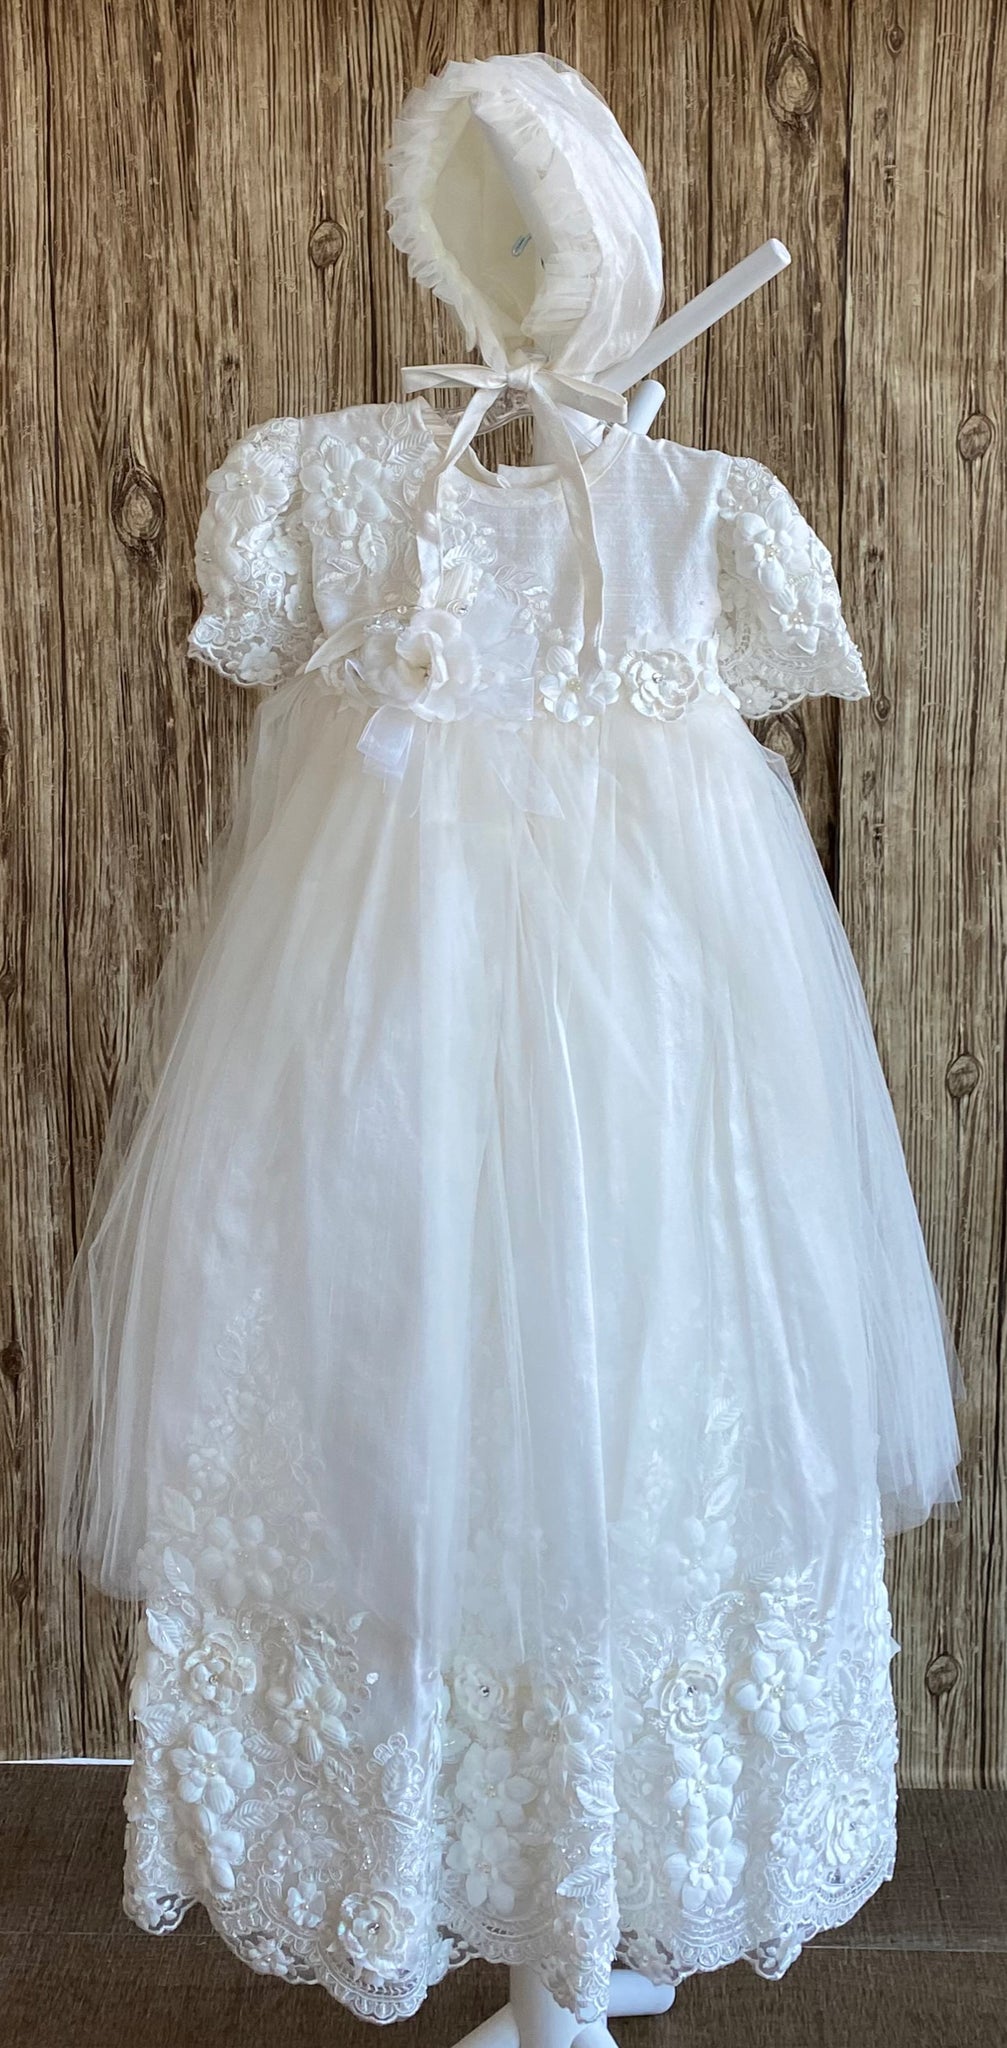 This a beautiful, one-of-a-kind baptism gown.  A lovely gown for a precious child.  Ivory, size 12M Satin bodice with large floral embroidered detailing Floral embroidered sleeves Intricate flowered belting along bodice  Tulle skirting over floral embroidery Rhinestone centers on embroidered flowers Satin bonnet with large embroidered flower Pearl center on bonnet flower Ruffled tulle around brim of bonnet Satin ribbon closure on bonnet